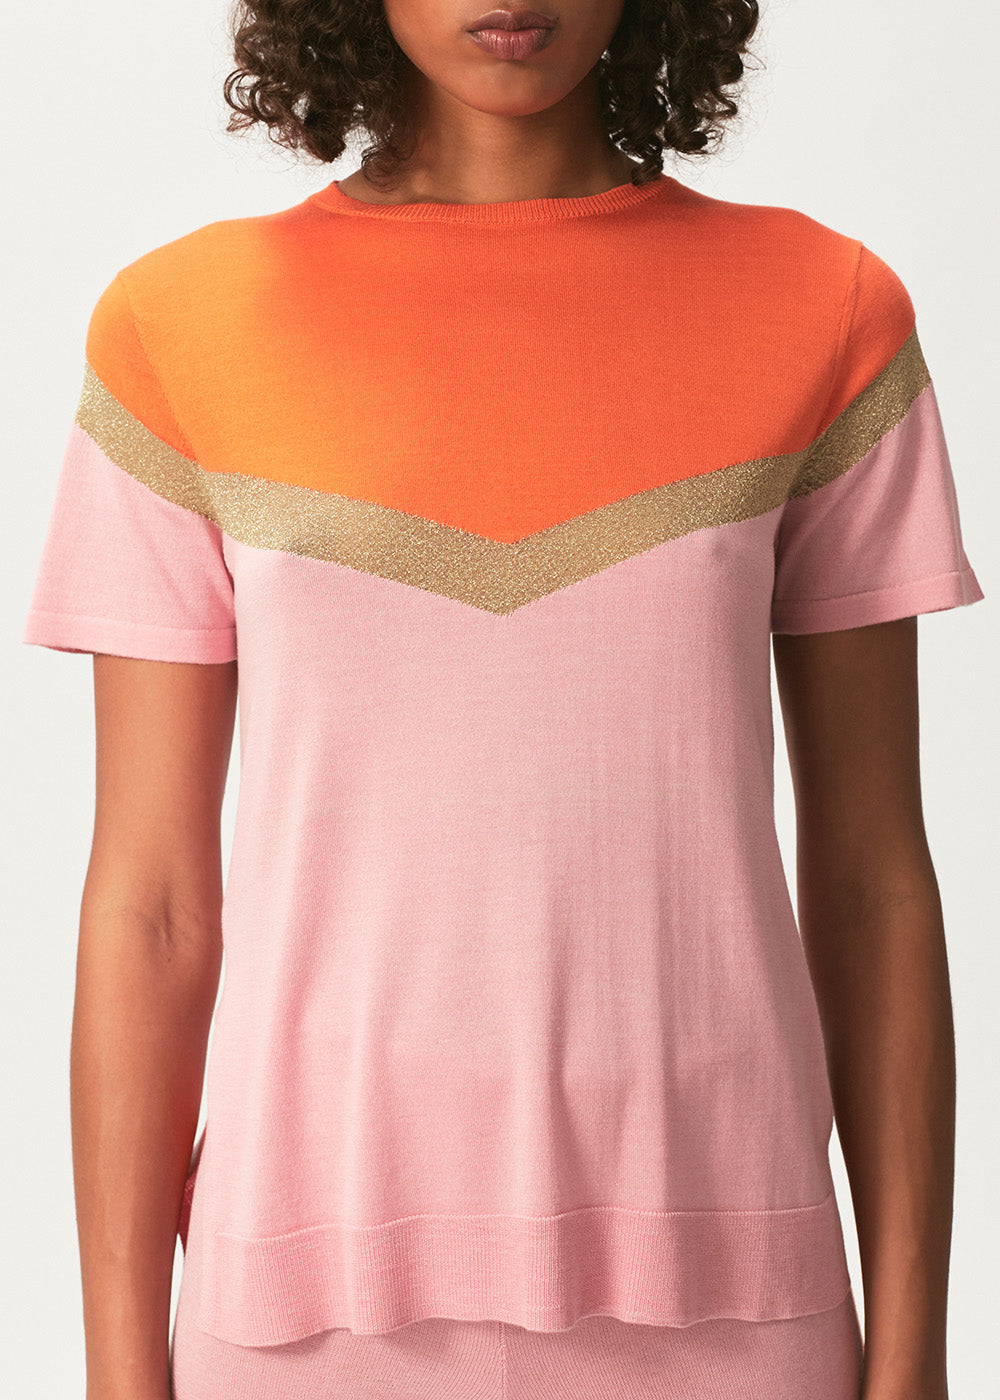 Igne Luxe Tee - Large / EMBER/PINK/GOLD LUREX